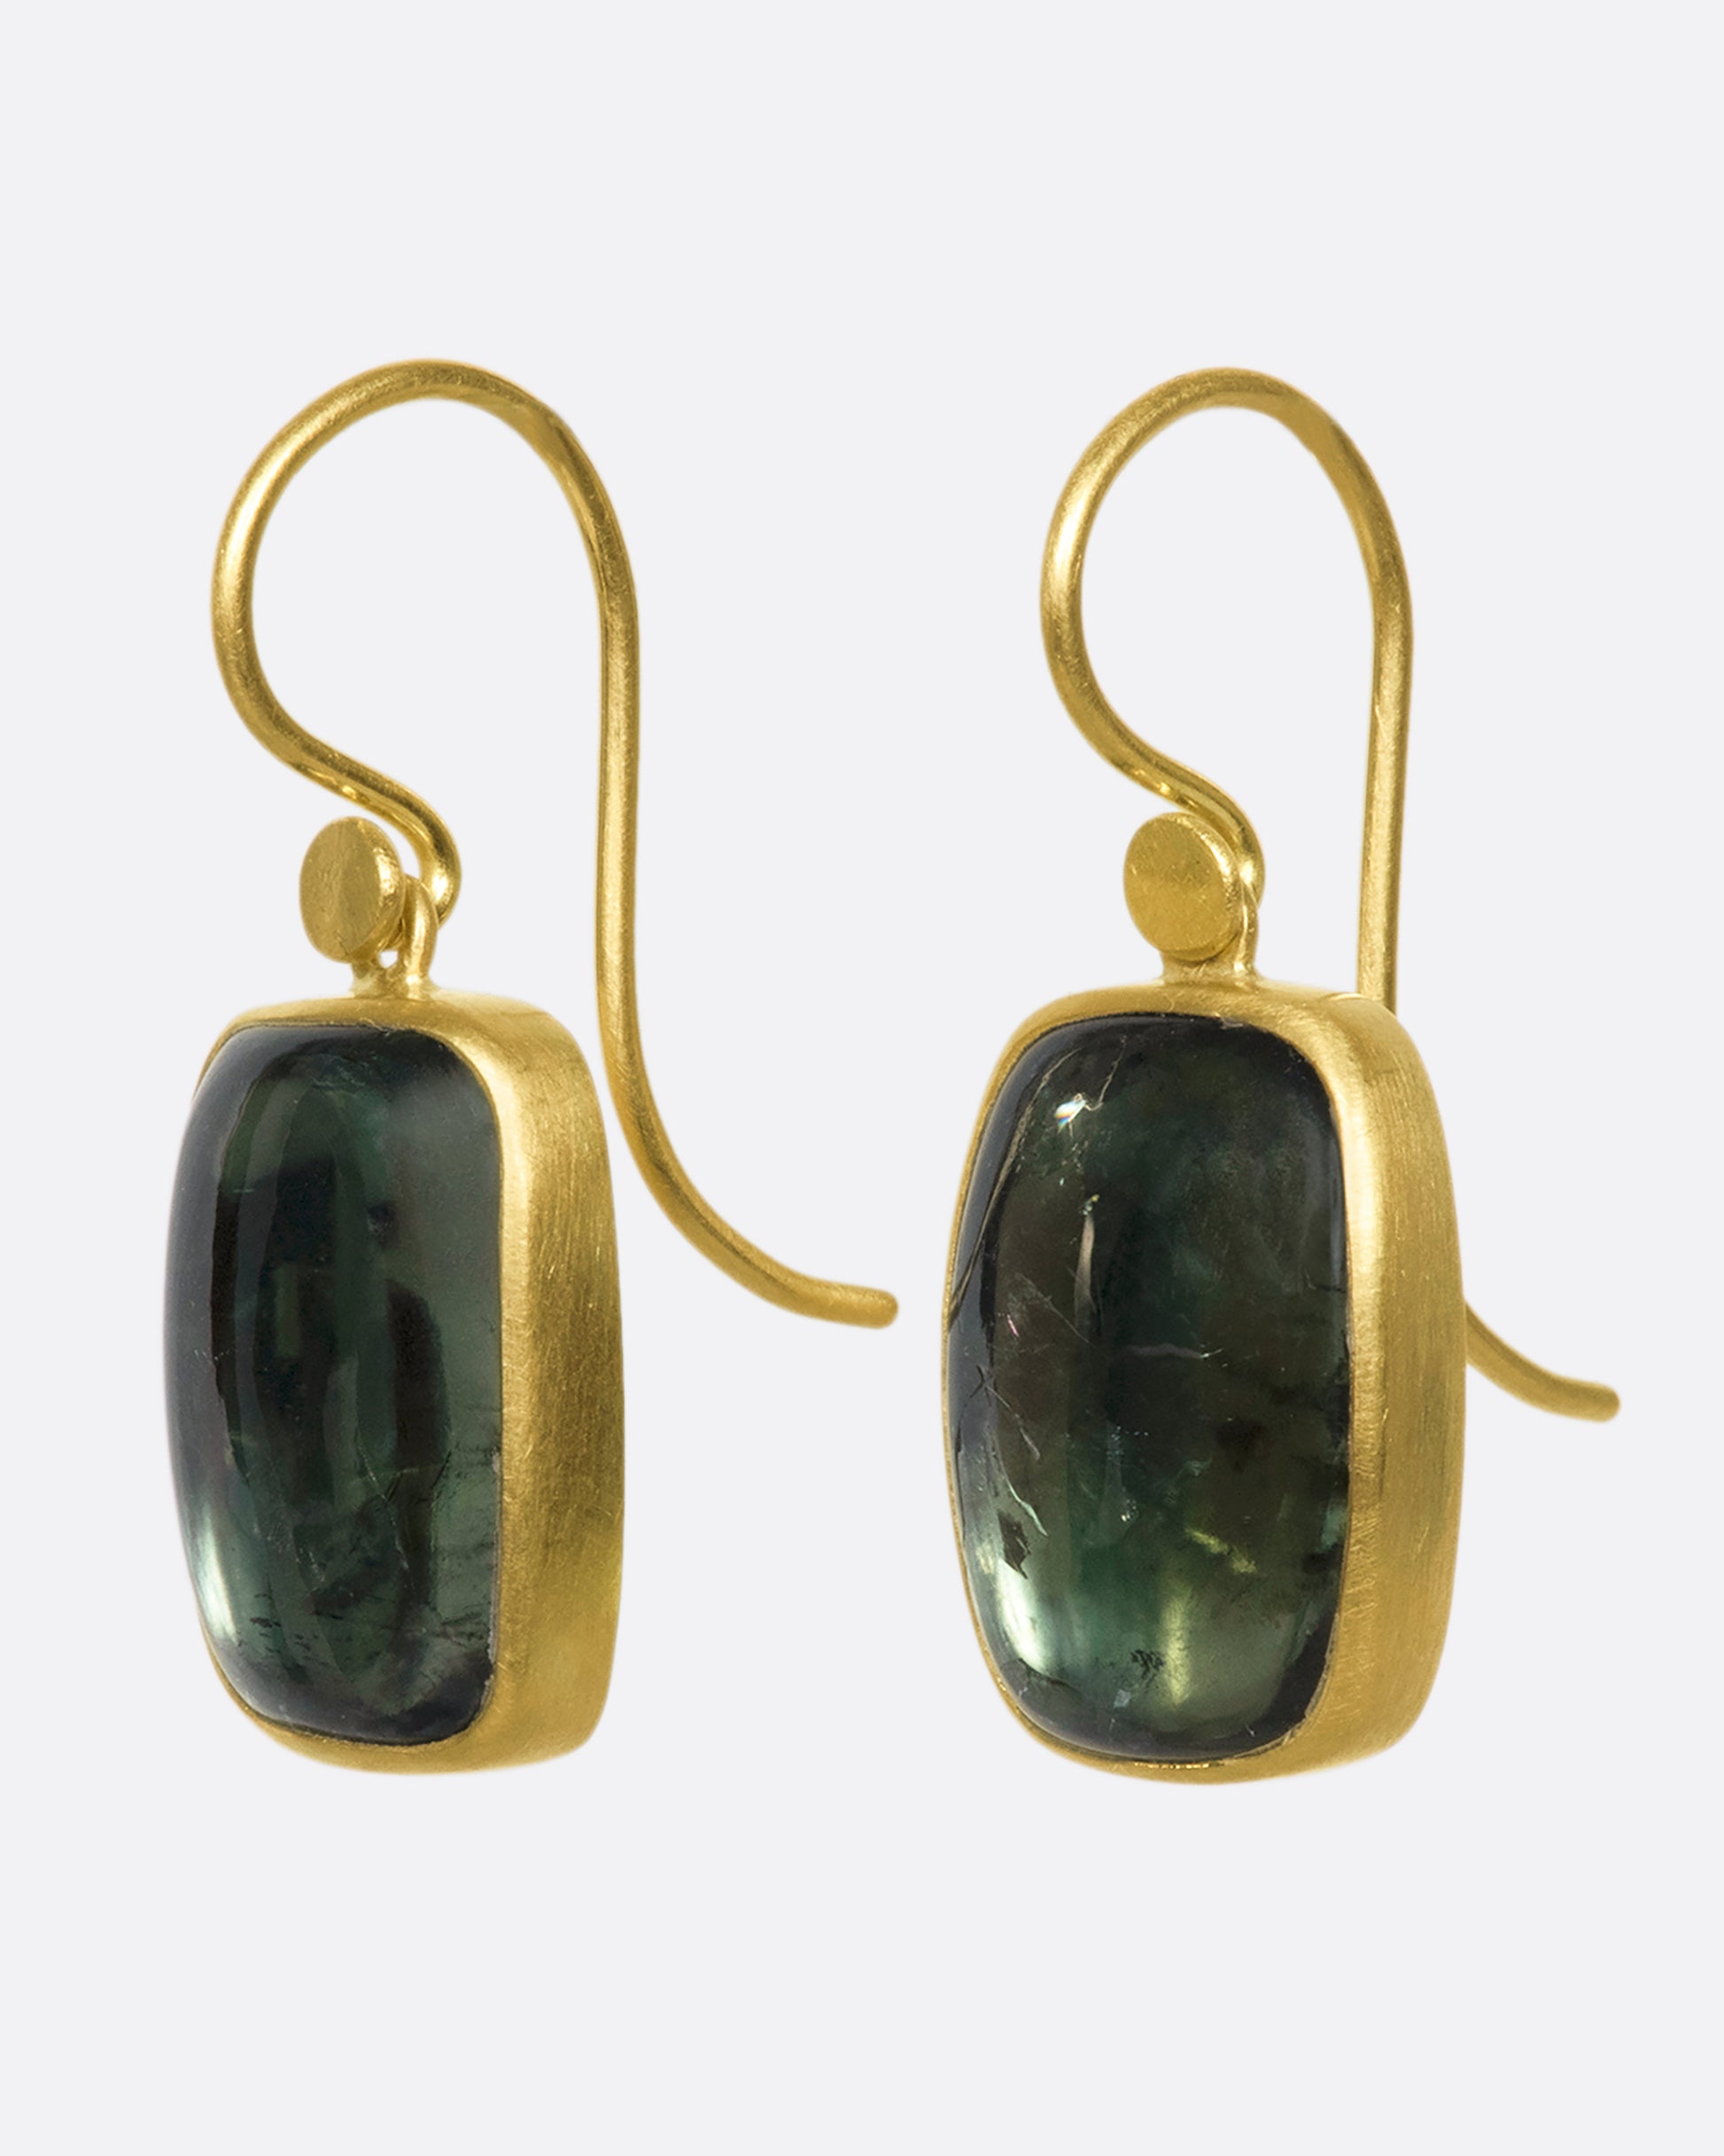 18k gold drops with green tourmaline chiclets. A gold bezel wraps the translucsent forrest green stone with stunning contrast that makes the tourmaline truly pop.